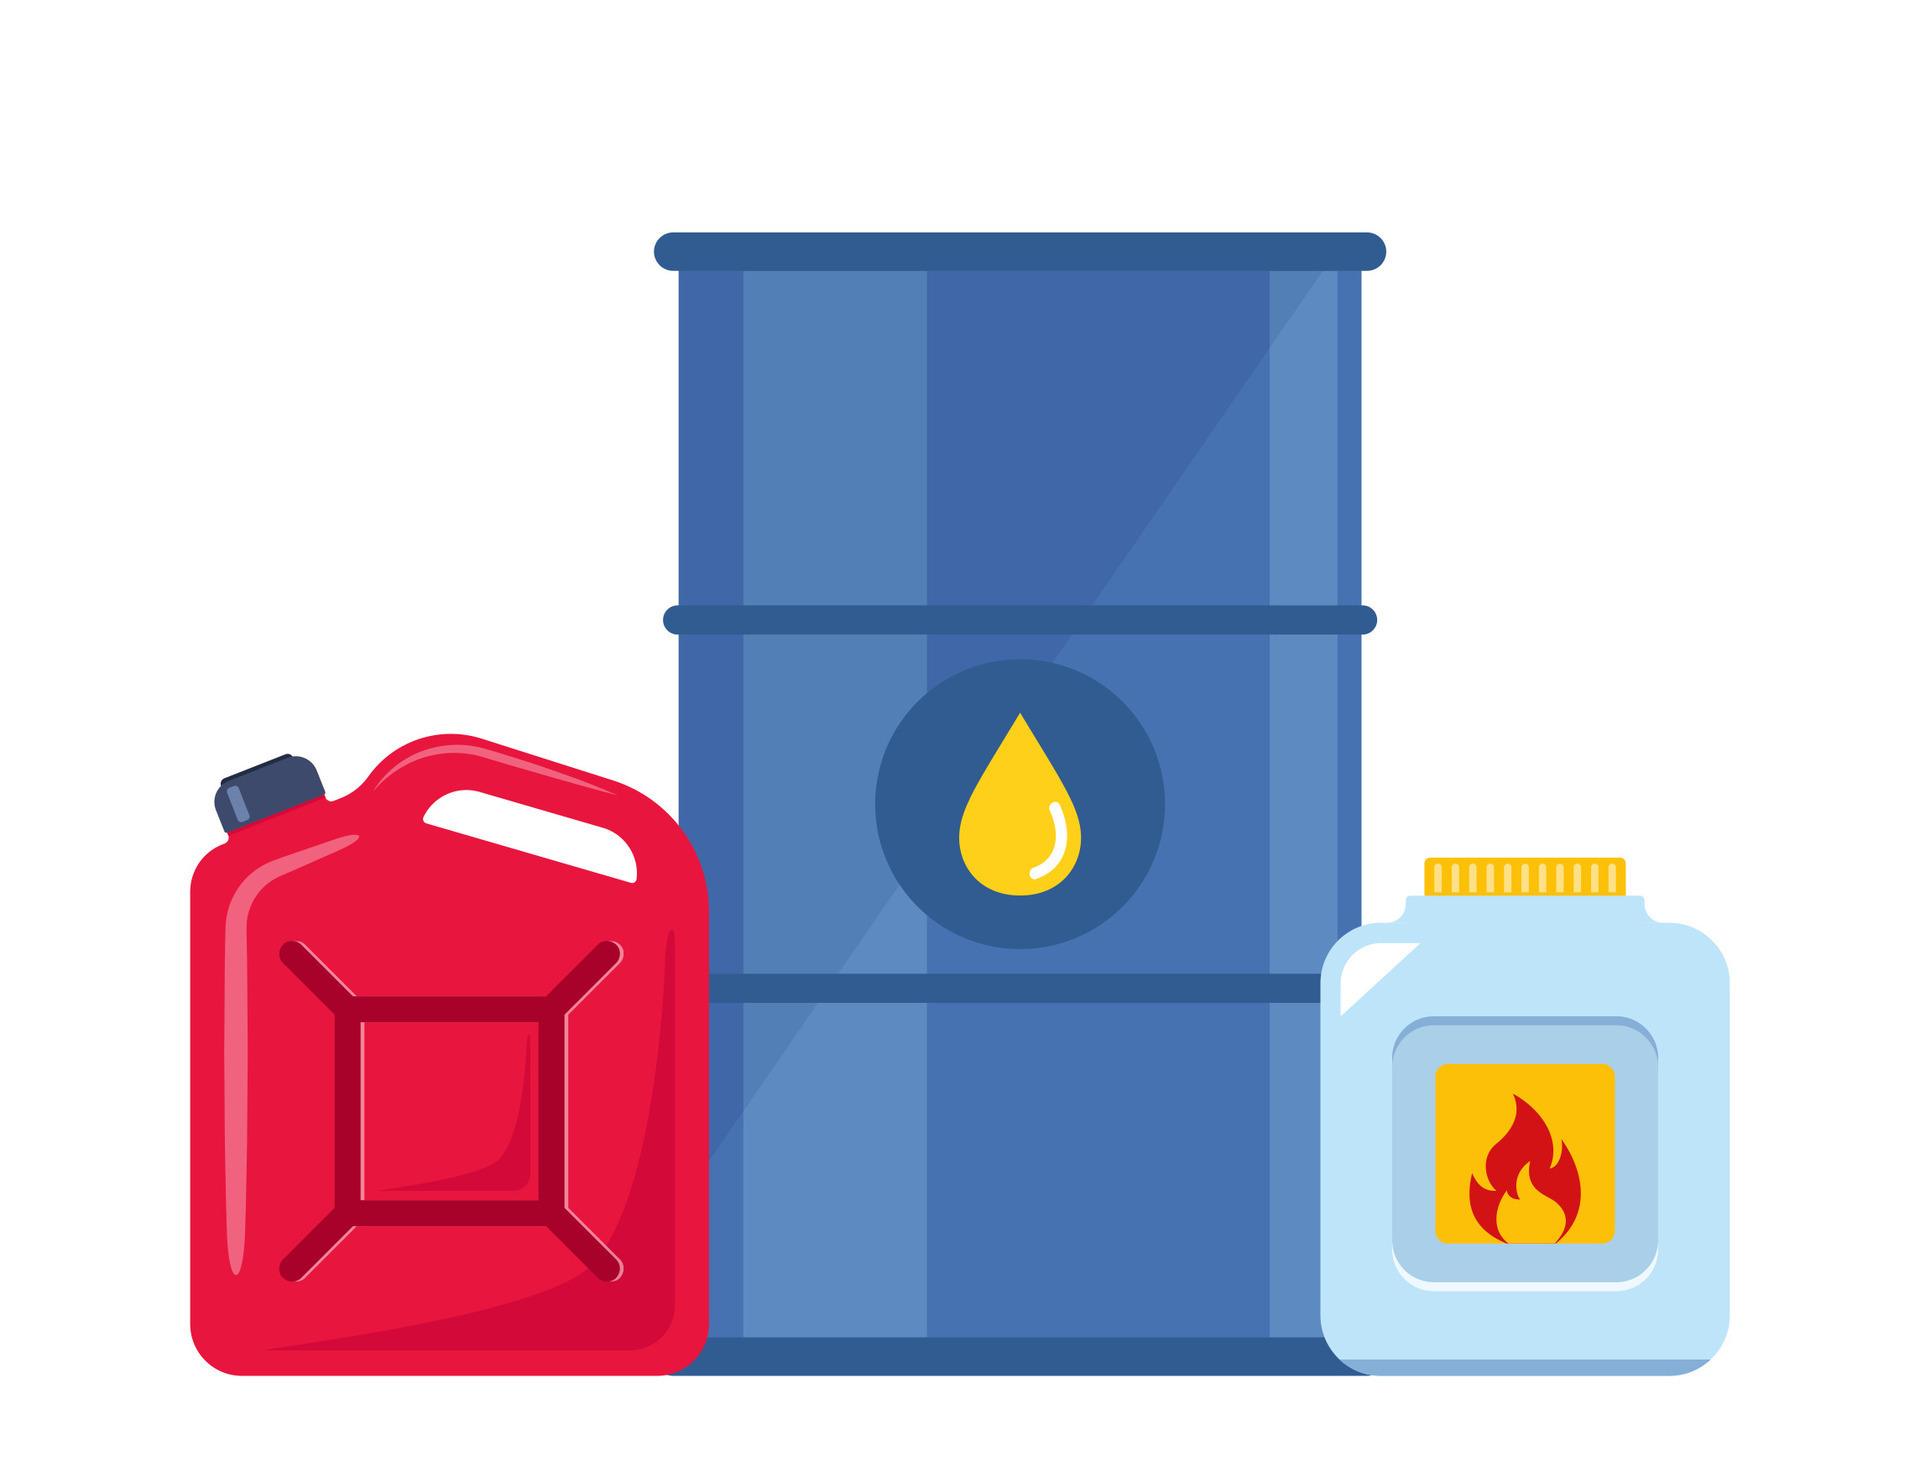 https://static.vecteezy.com/system/resources/previews/030/758/130/original/chemical-containers-jerrycan-barrel-steel-storage-cask-for-oil-fuel-gas-and-petroleum-cask-plastic-bottle-with-flammable-liquid-illustration-vector.jpg